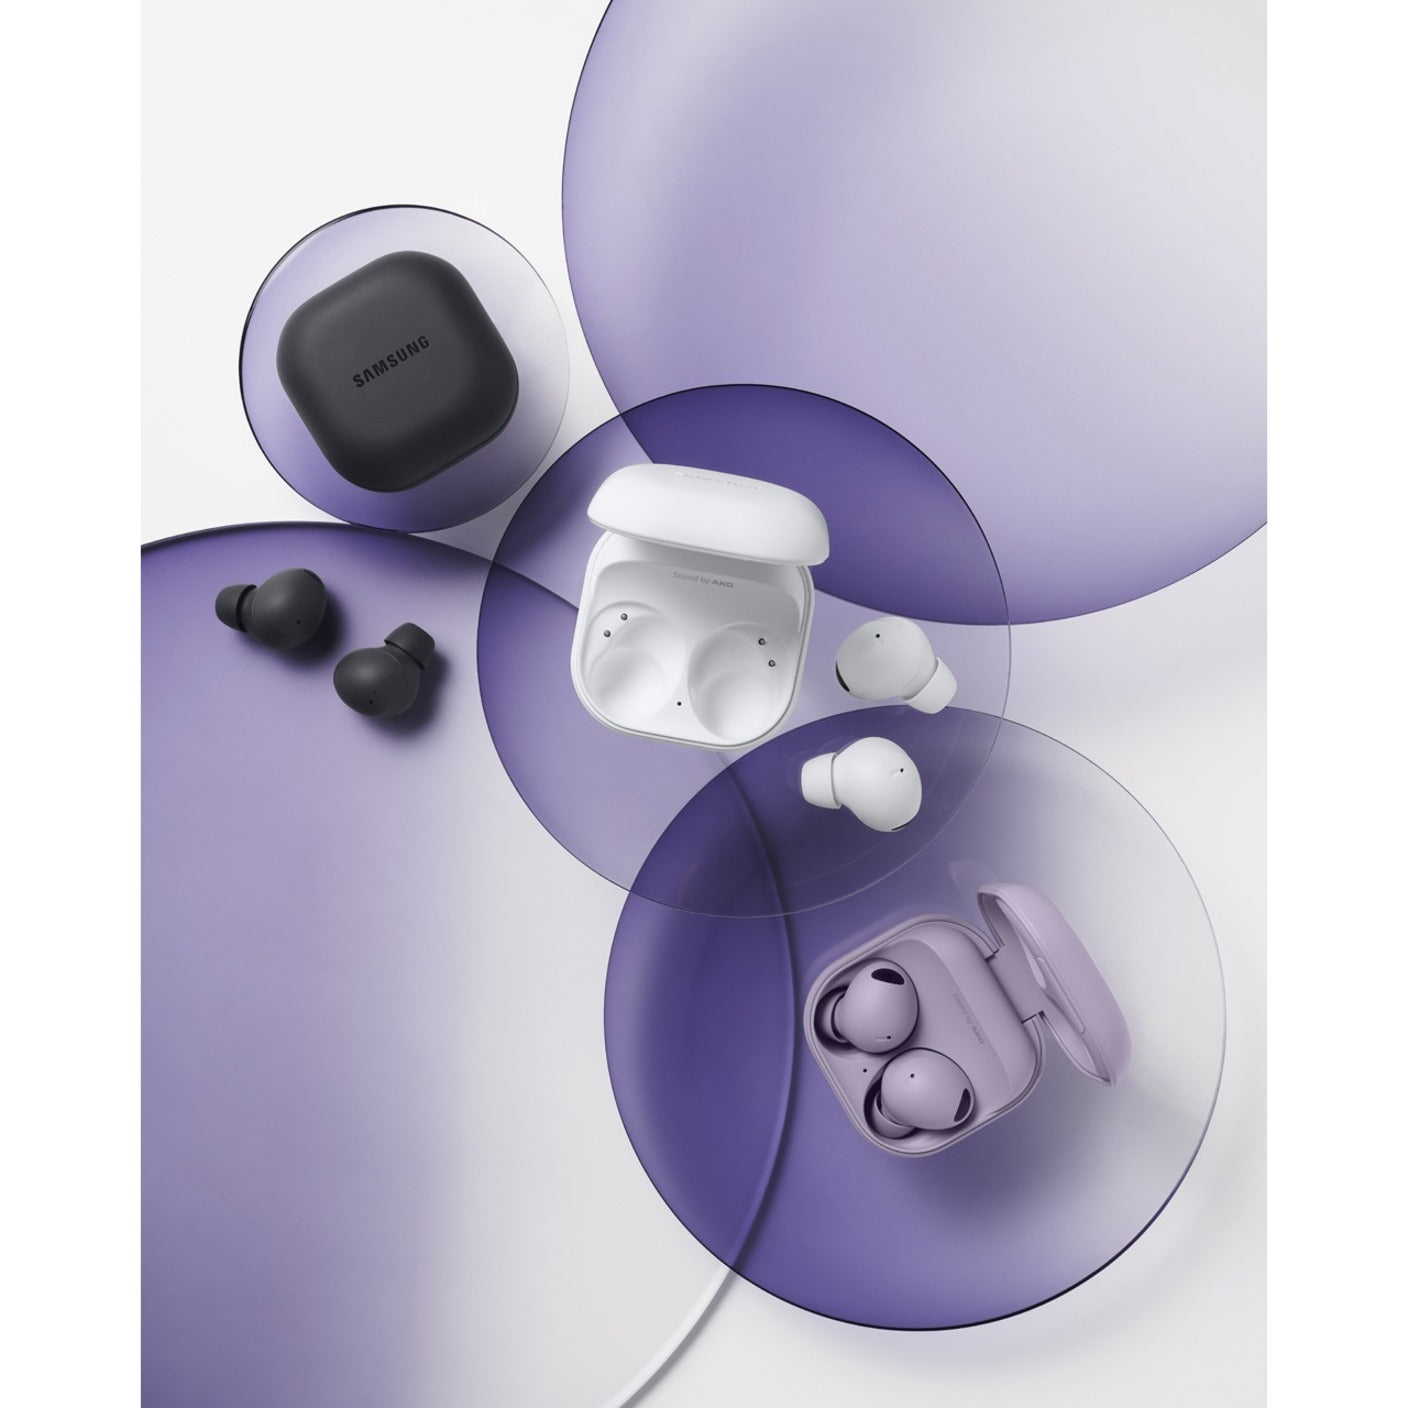 Samsung SM-R510NZAAXAR Galaxy Buds2 Pro Graphite, True Wireless Earset with Active Noise Canceling